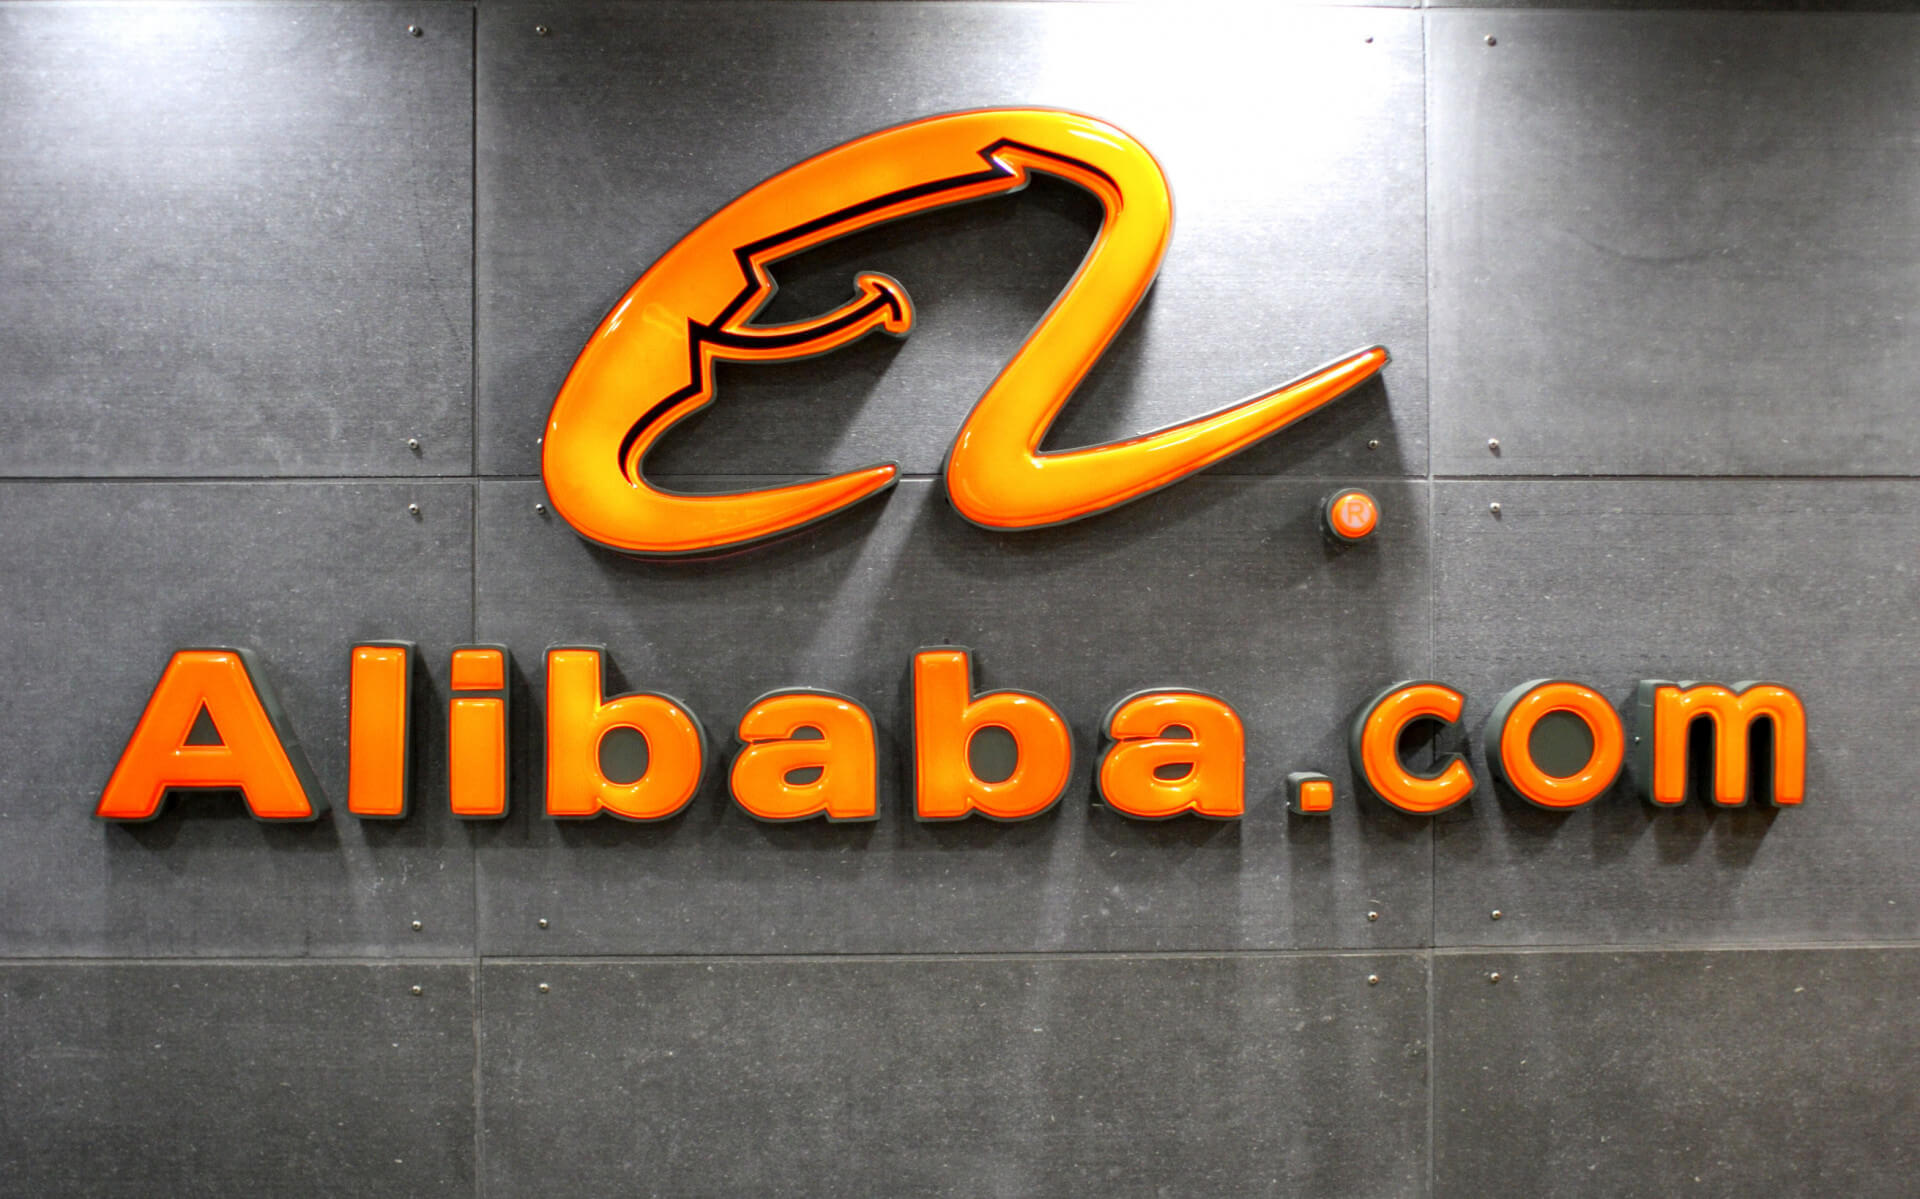 Is Alibaba Safe and Legit?